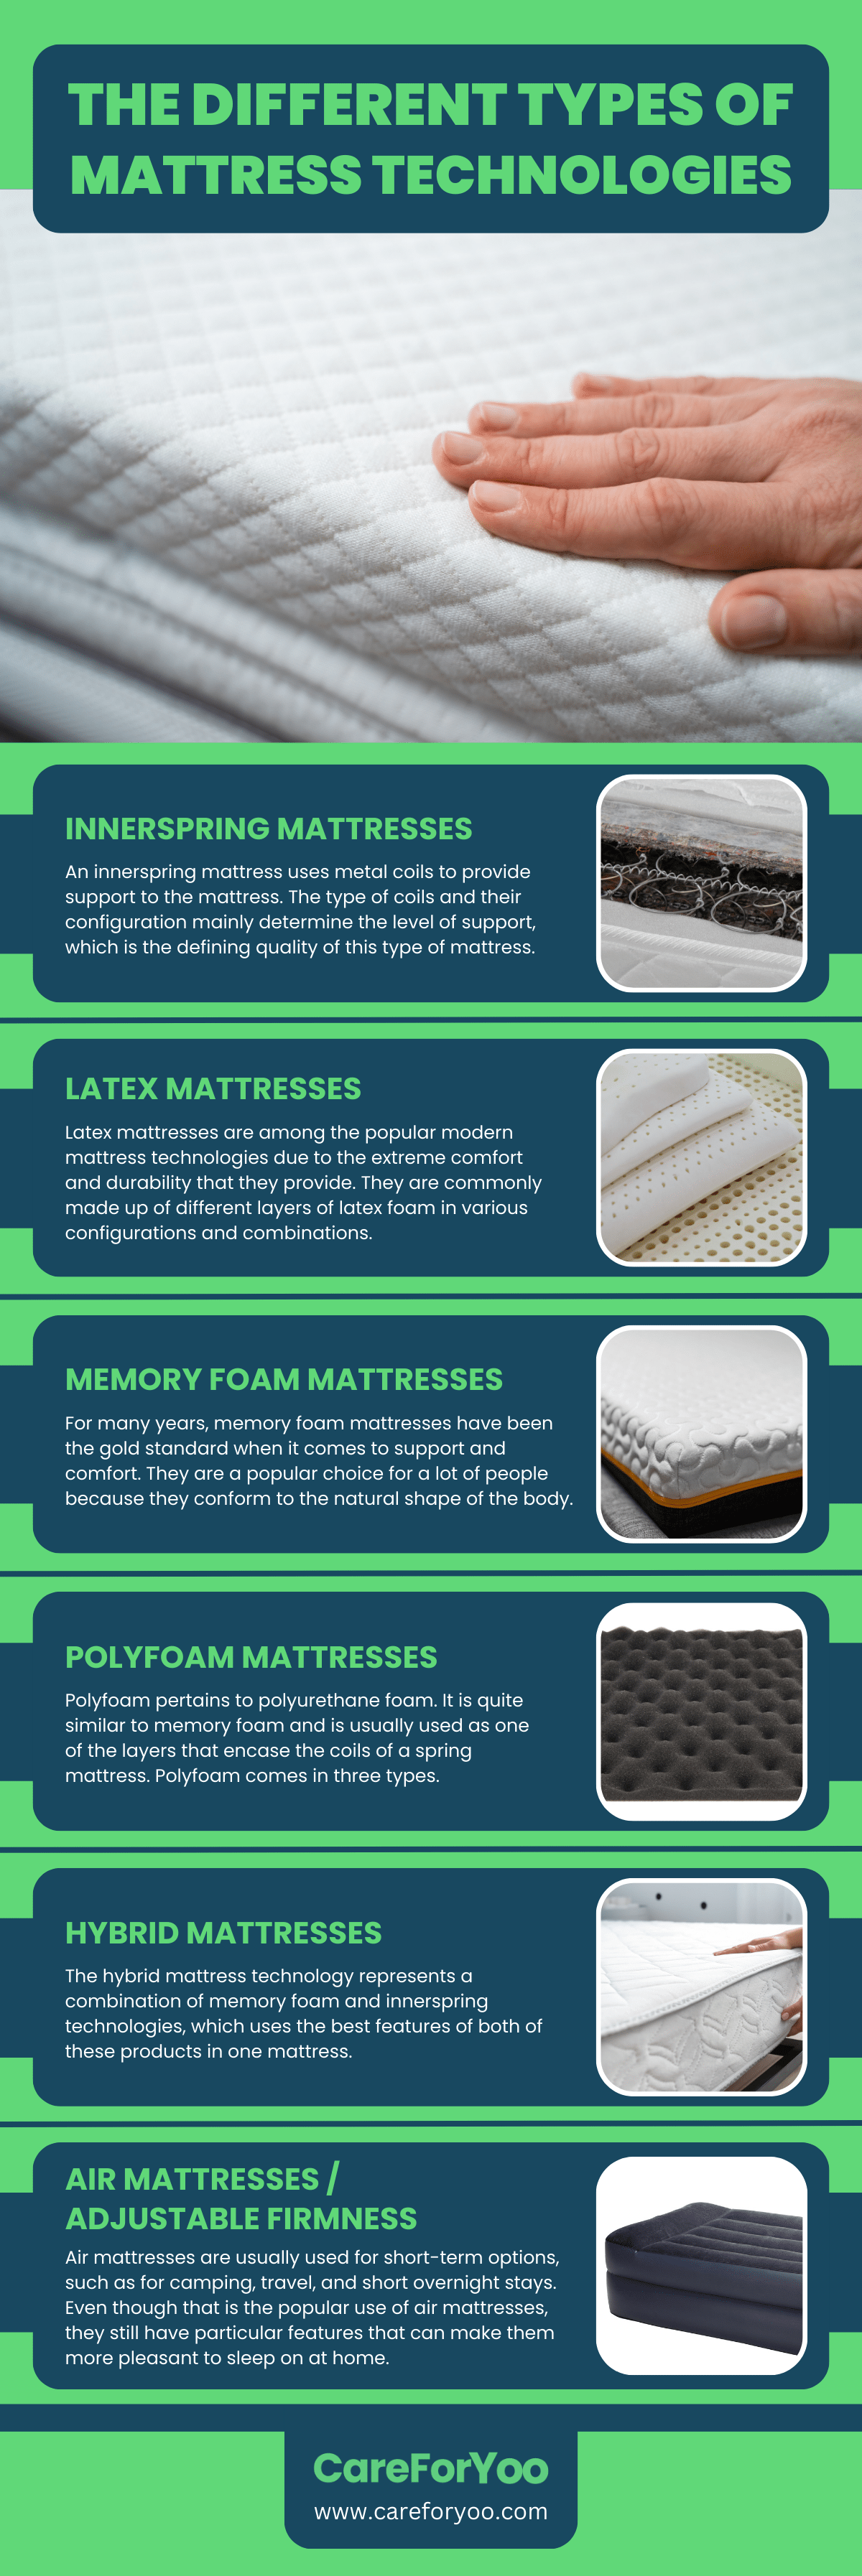 The Different Types of Mattress Technologies